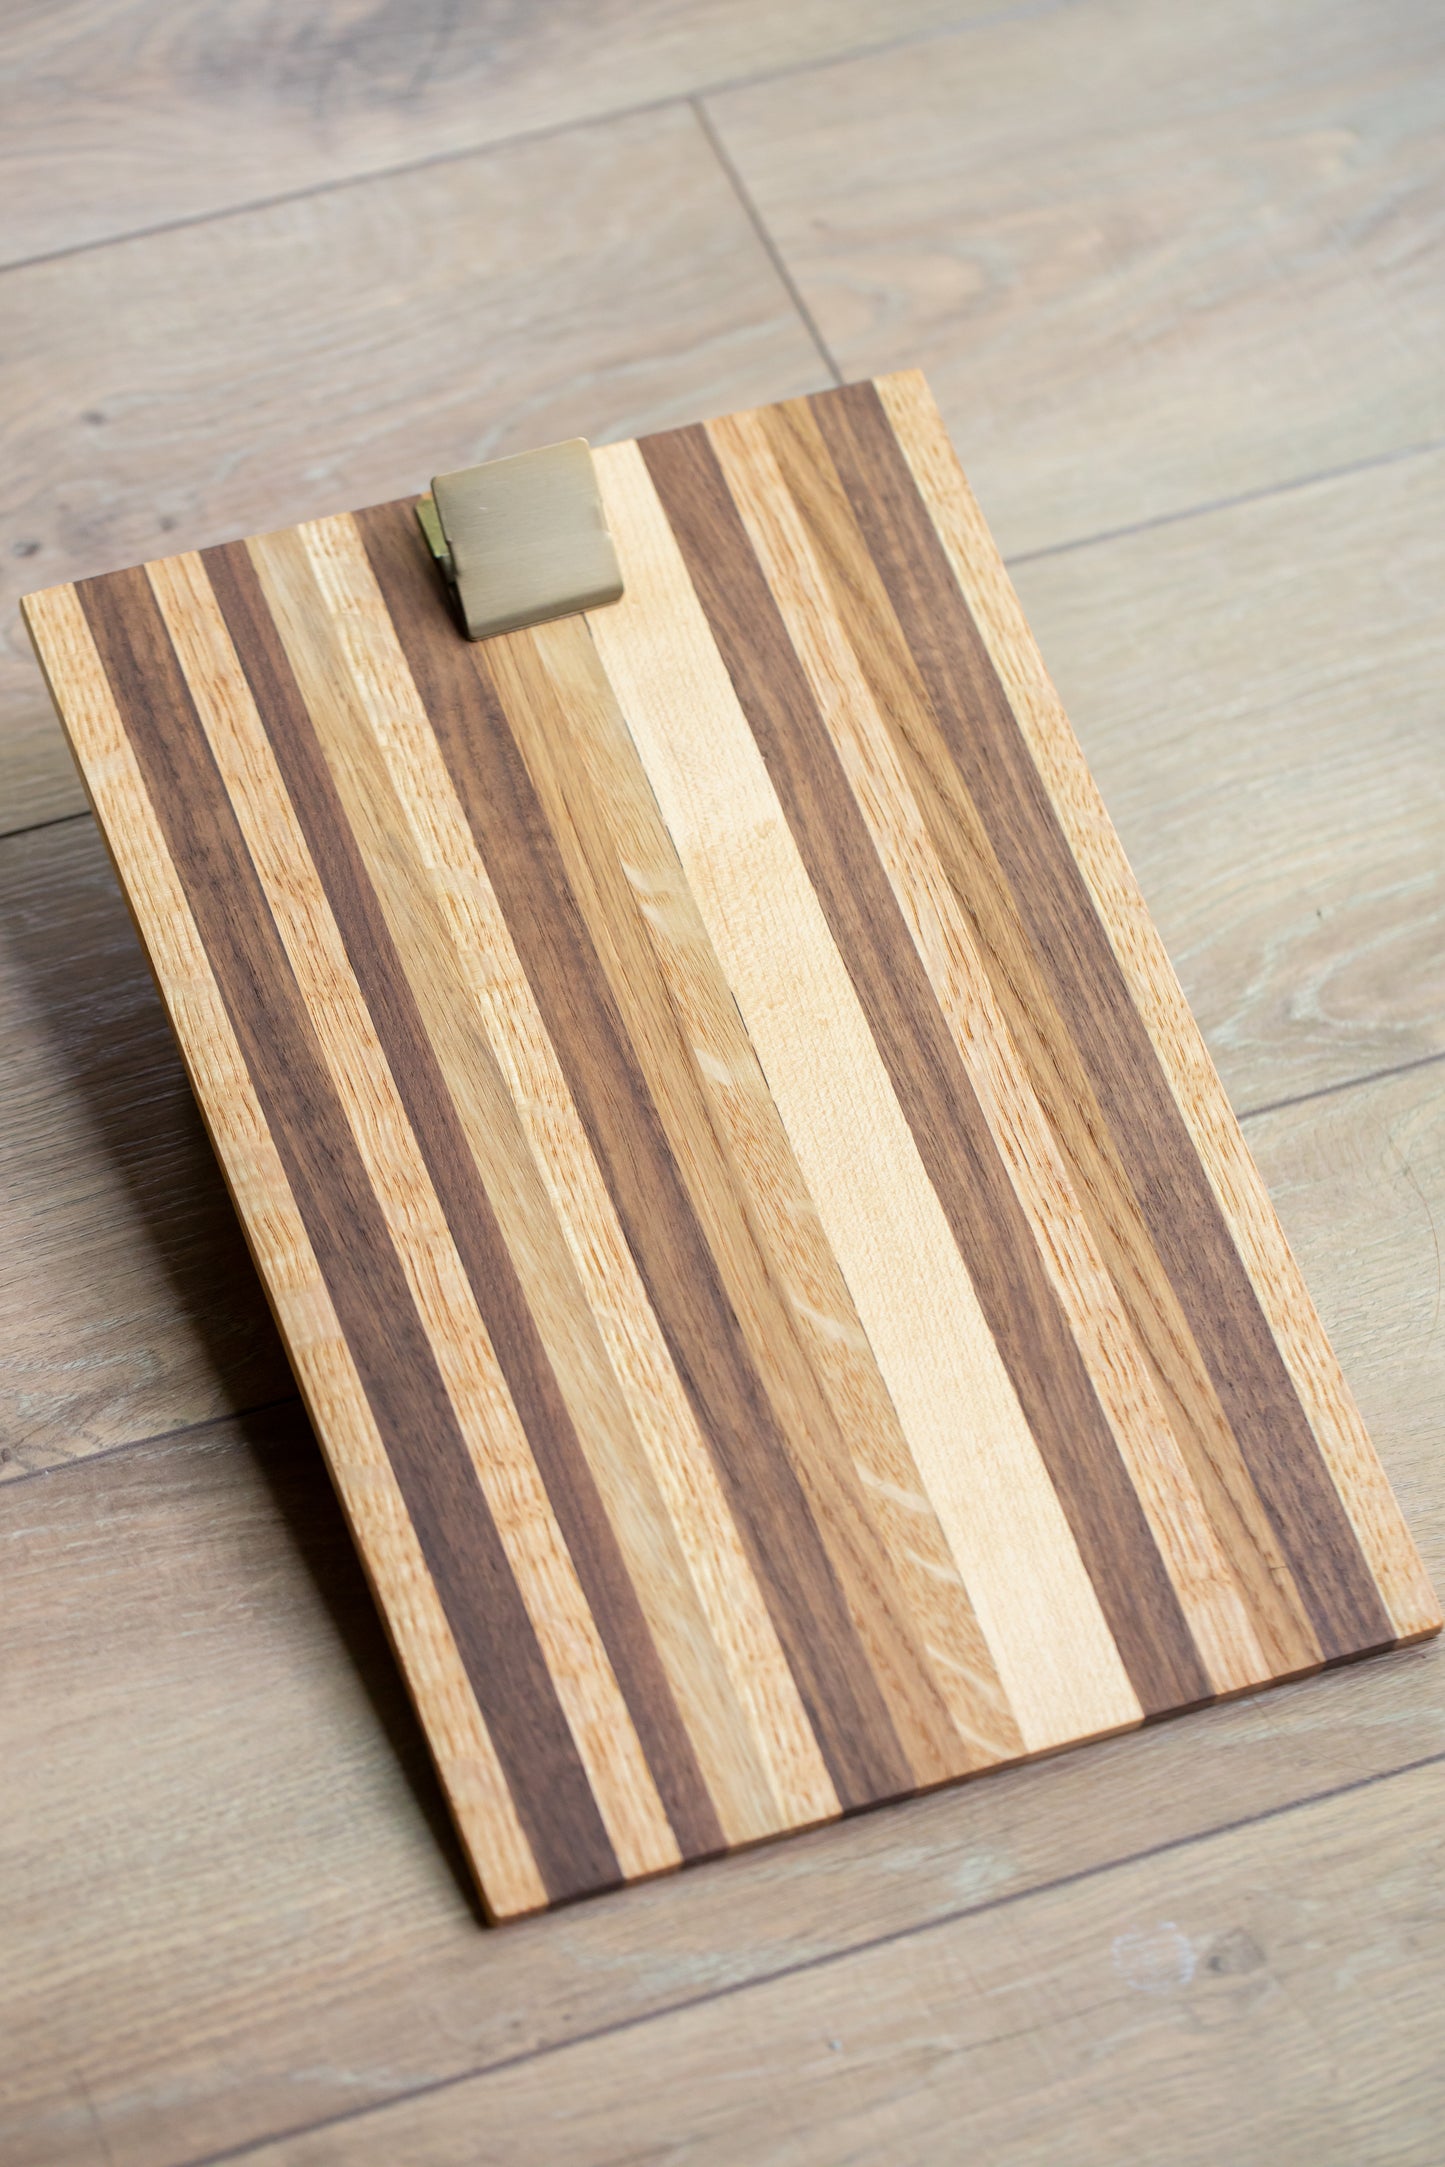 One Time Item : Hardwood Square Clipboard